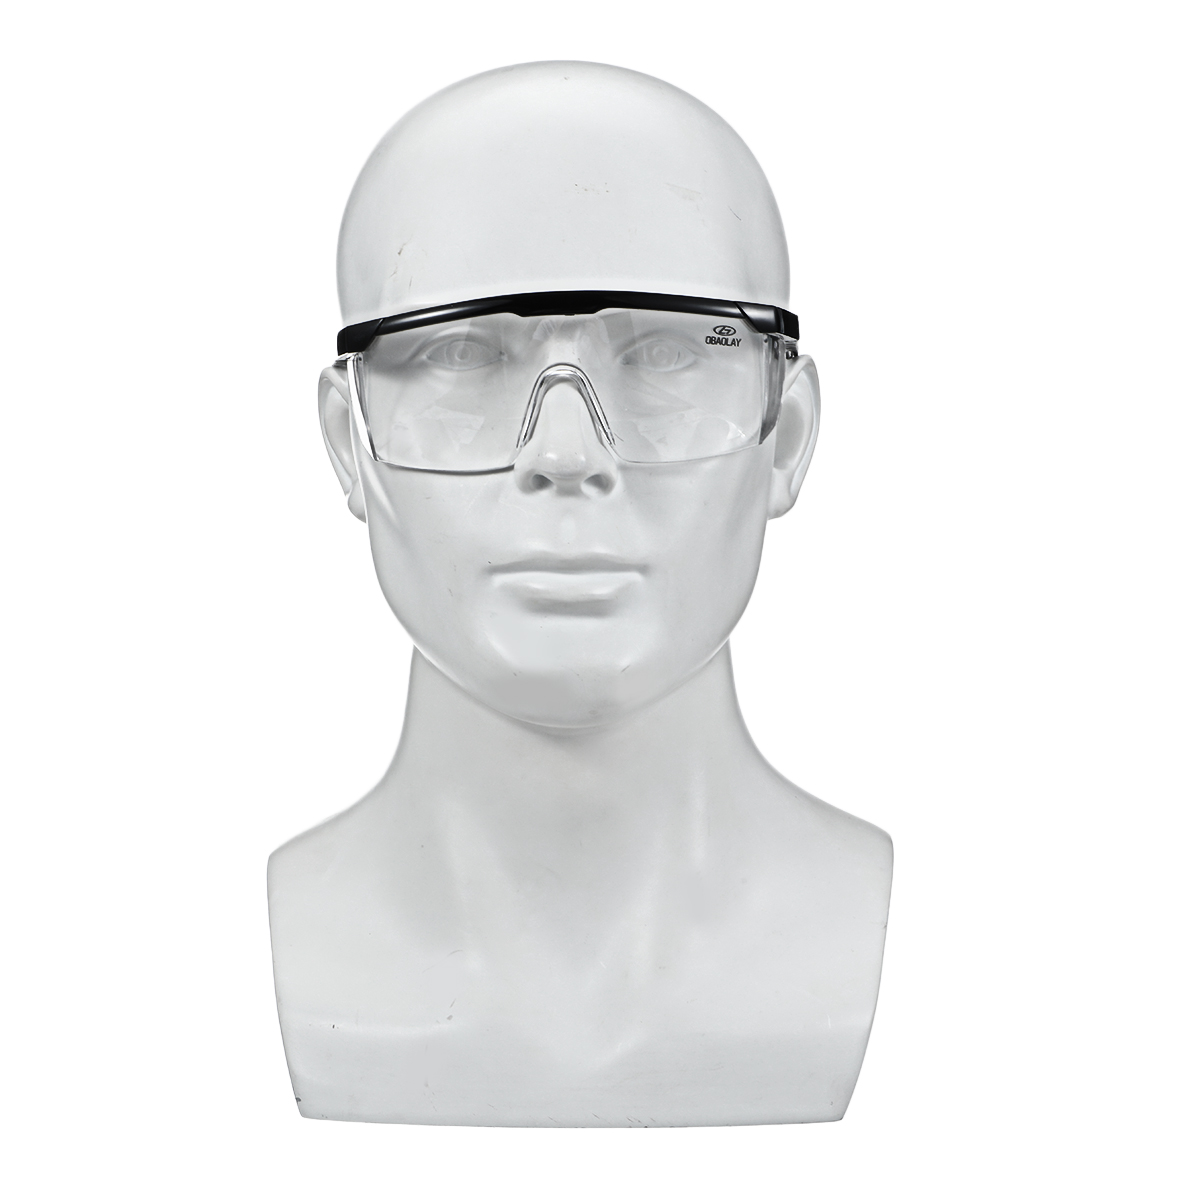 1PCS-Safety-Glasses-Work-Goggles-Eyewear-Protective-Industrial-Lab-Dust-Droplets-1889895-11